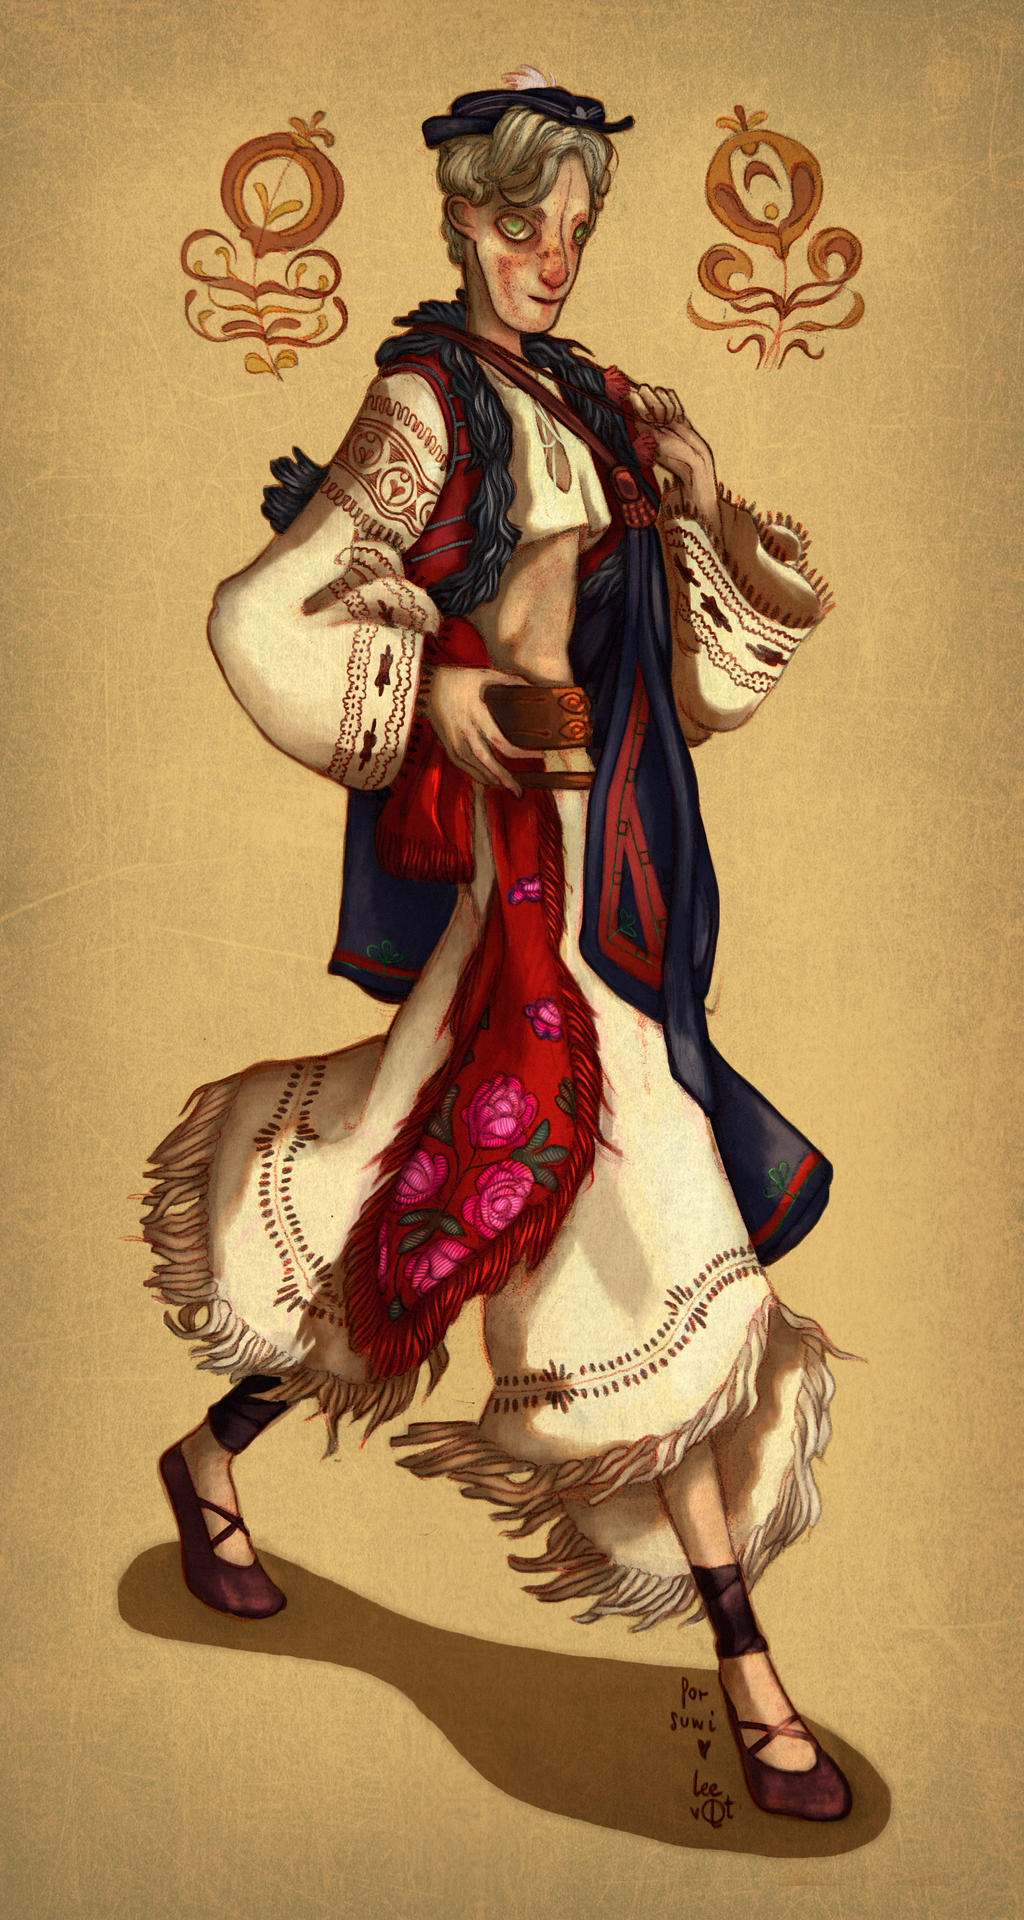 Traditional Slovak costume - AT with s-u-w-i by leevolt on DeviantArt